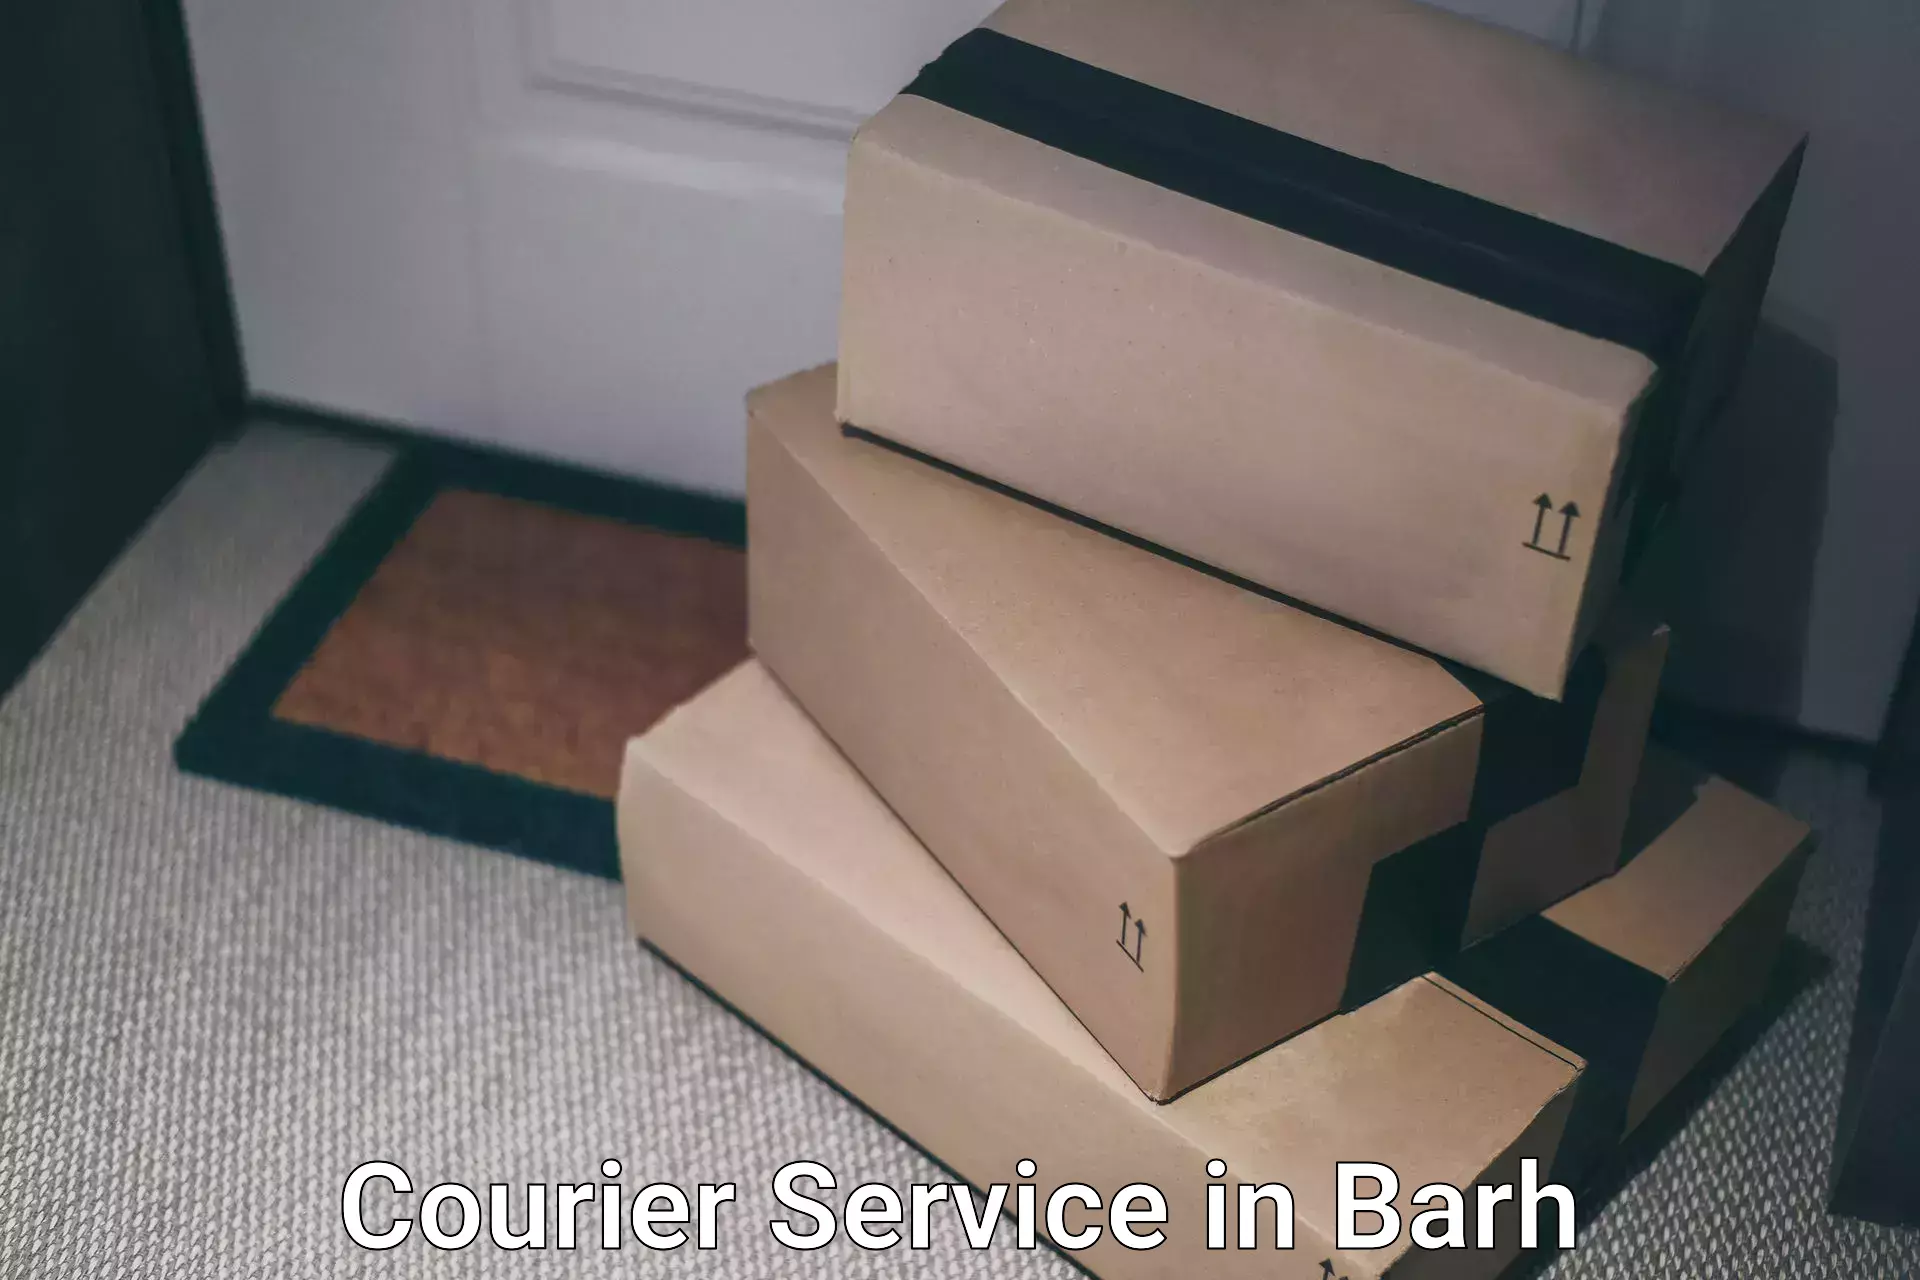 Seamless shipping experience in Barh